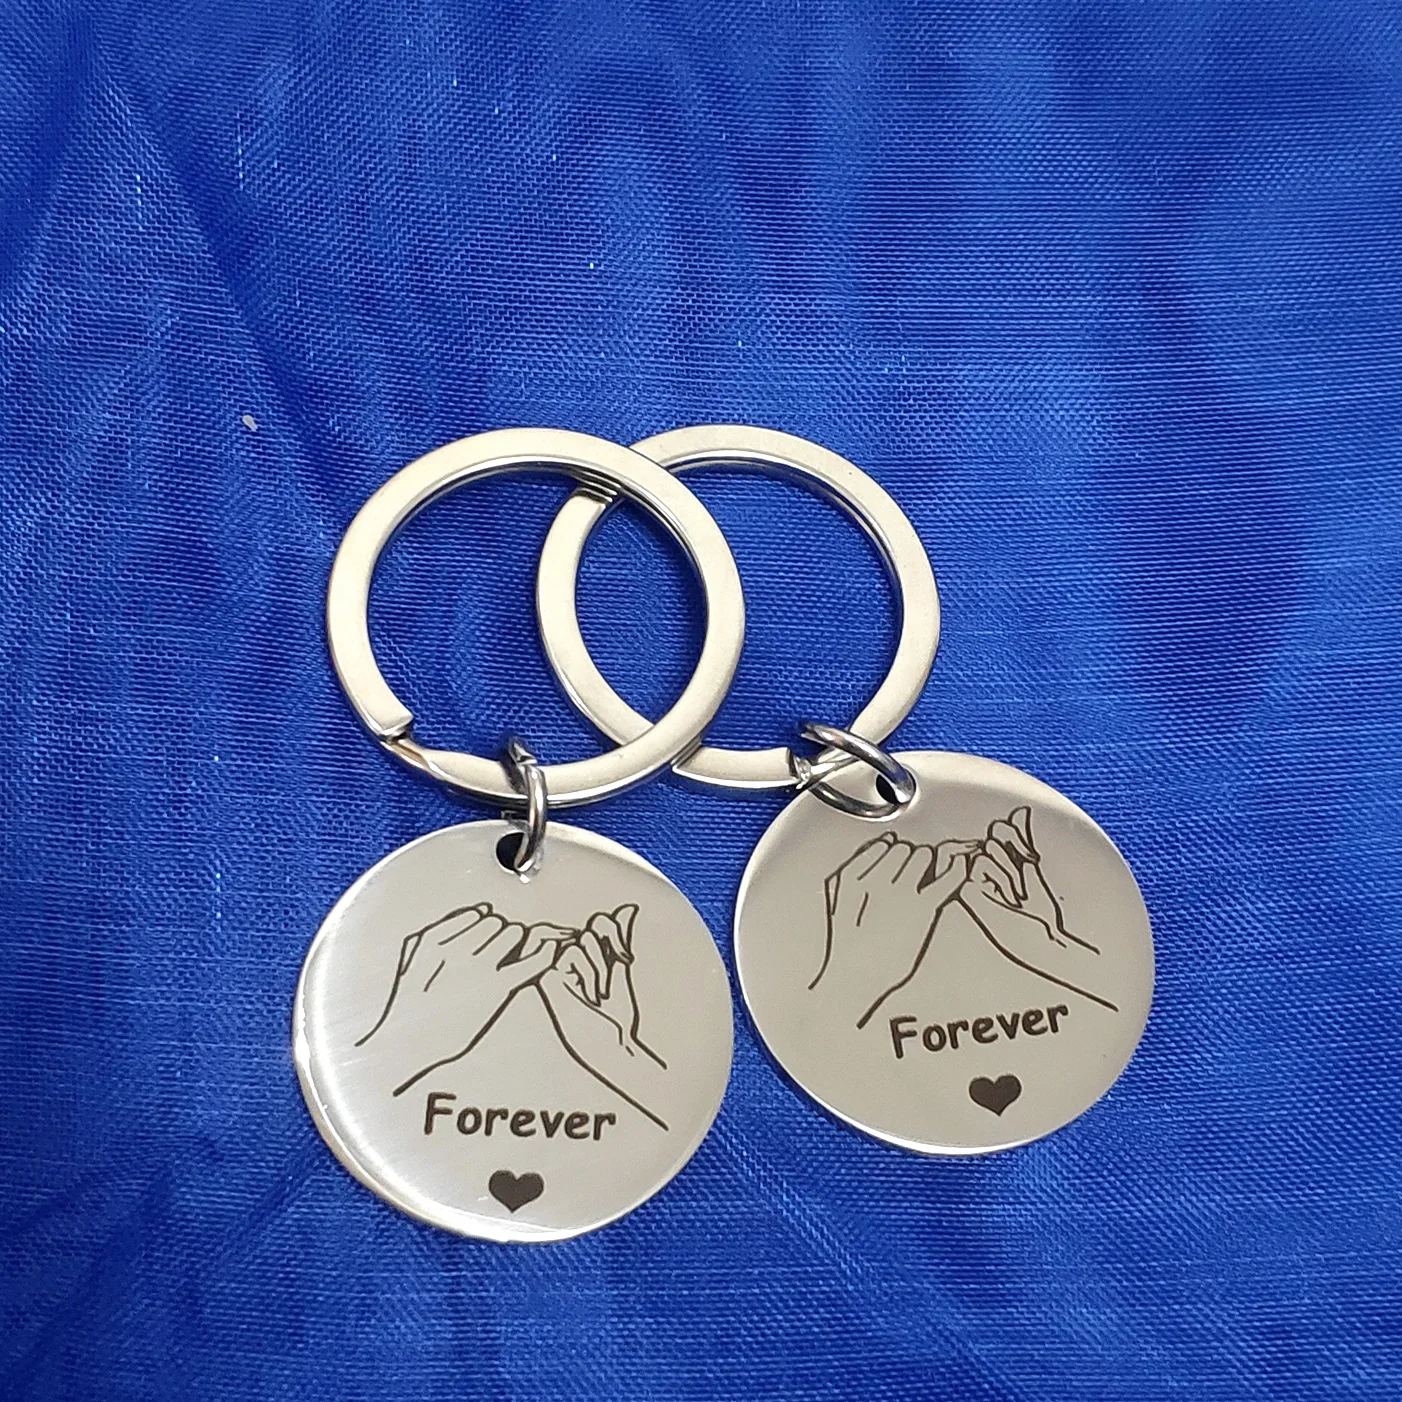 

Car Keys Keychain Hand in Hand Forever Ornaments Stainless Steel Keyring Round Card Metal Pendant Couple Gift Best Friend Holder